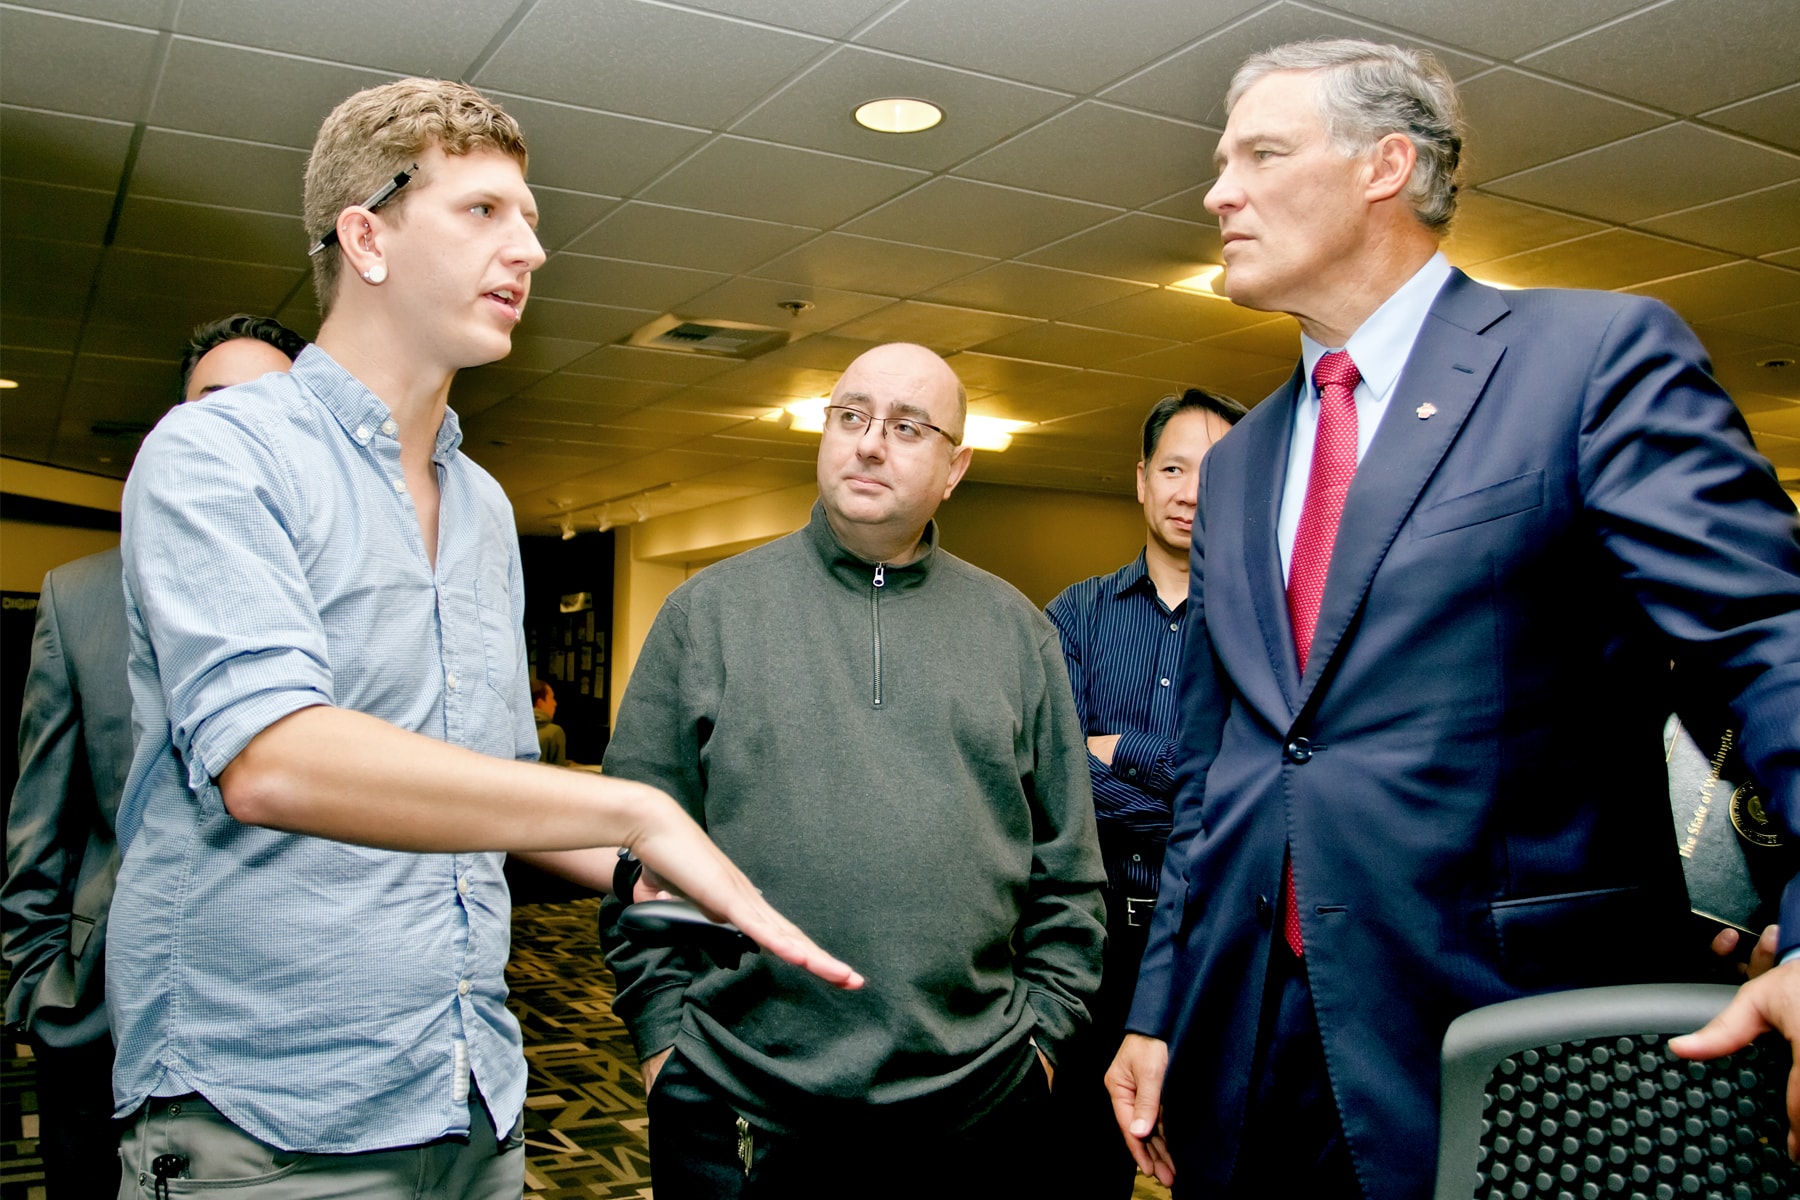 DigiPen student Joshawa Salyers gesturing as he speaks with Governor Jay Inslee and Claude Comair